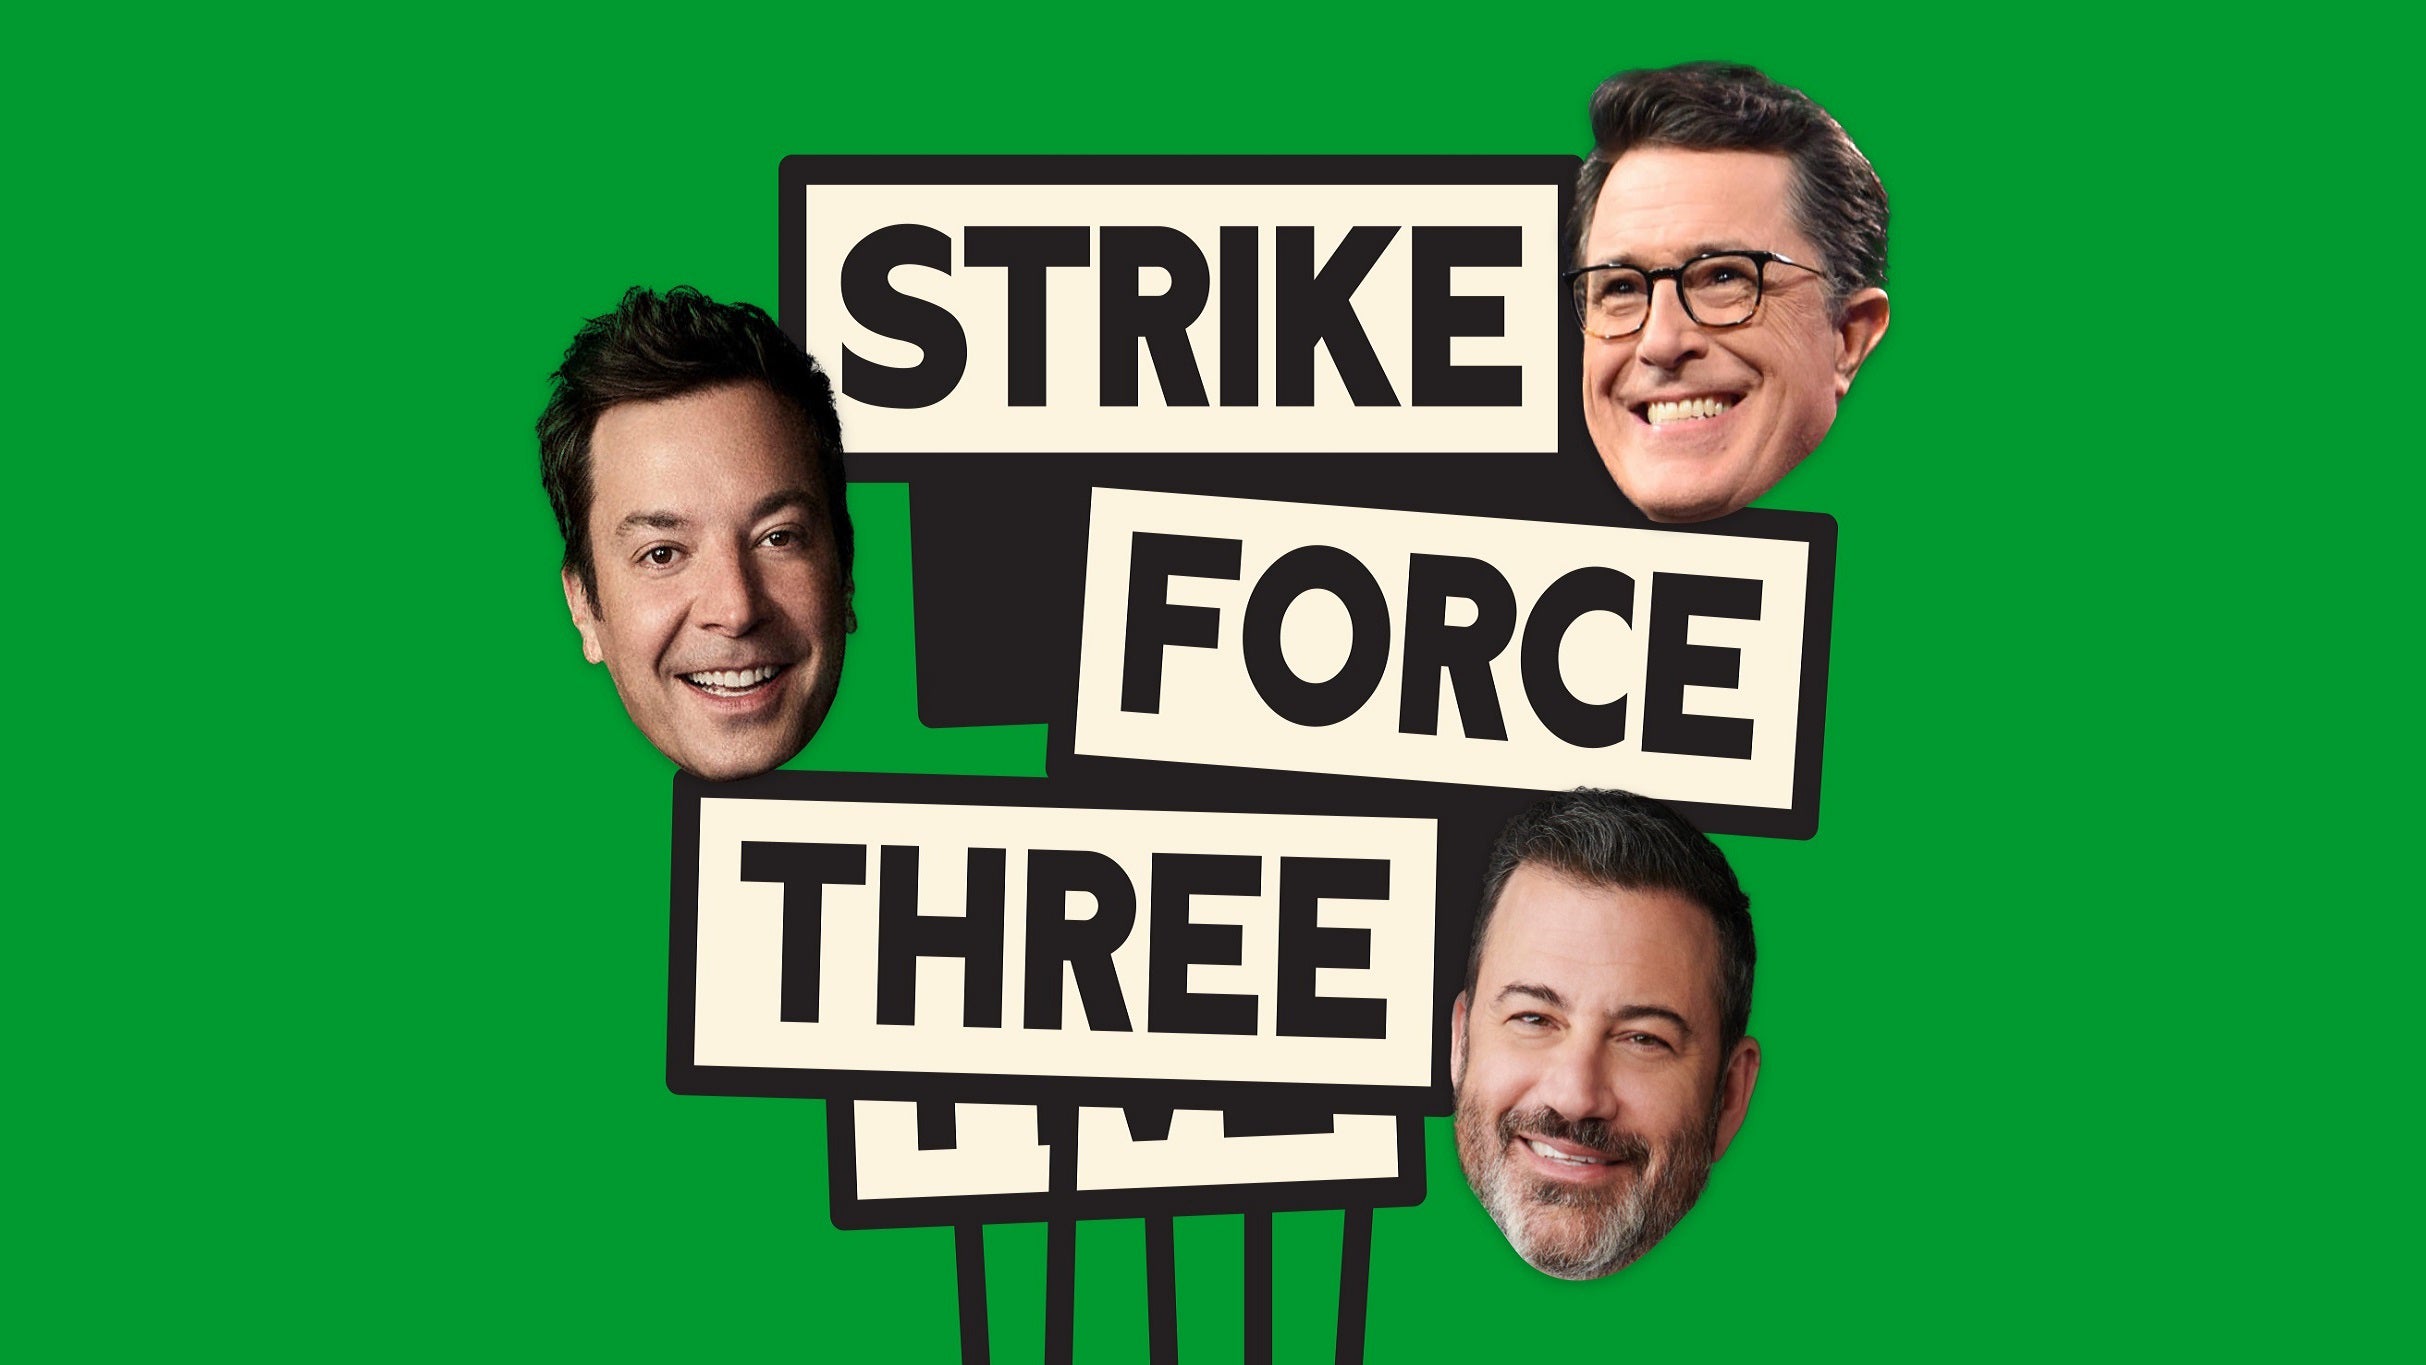 Strike Force Three pre-sale password for approved tickets in Las Vegas